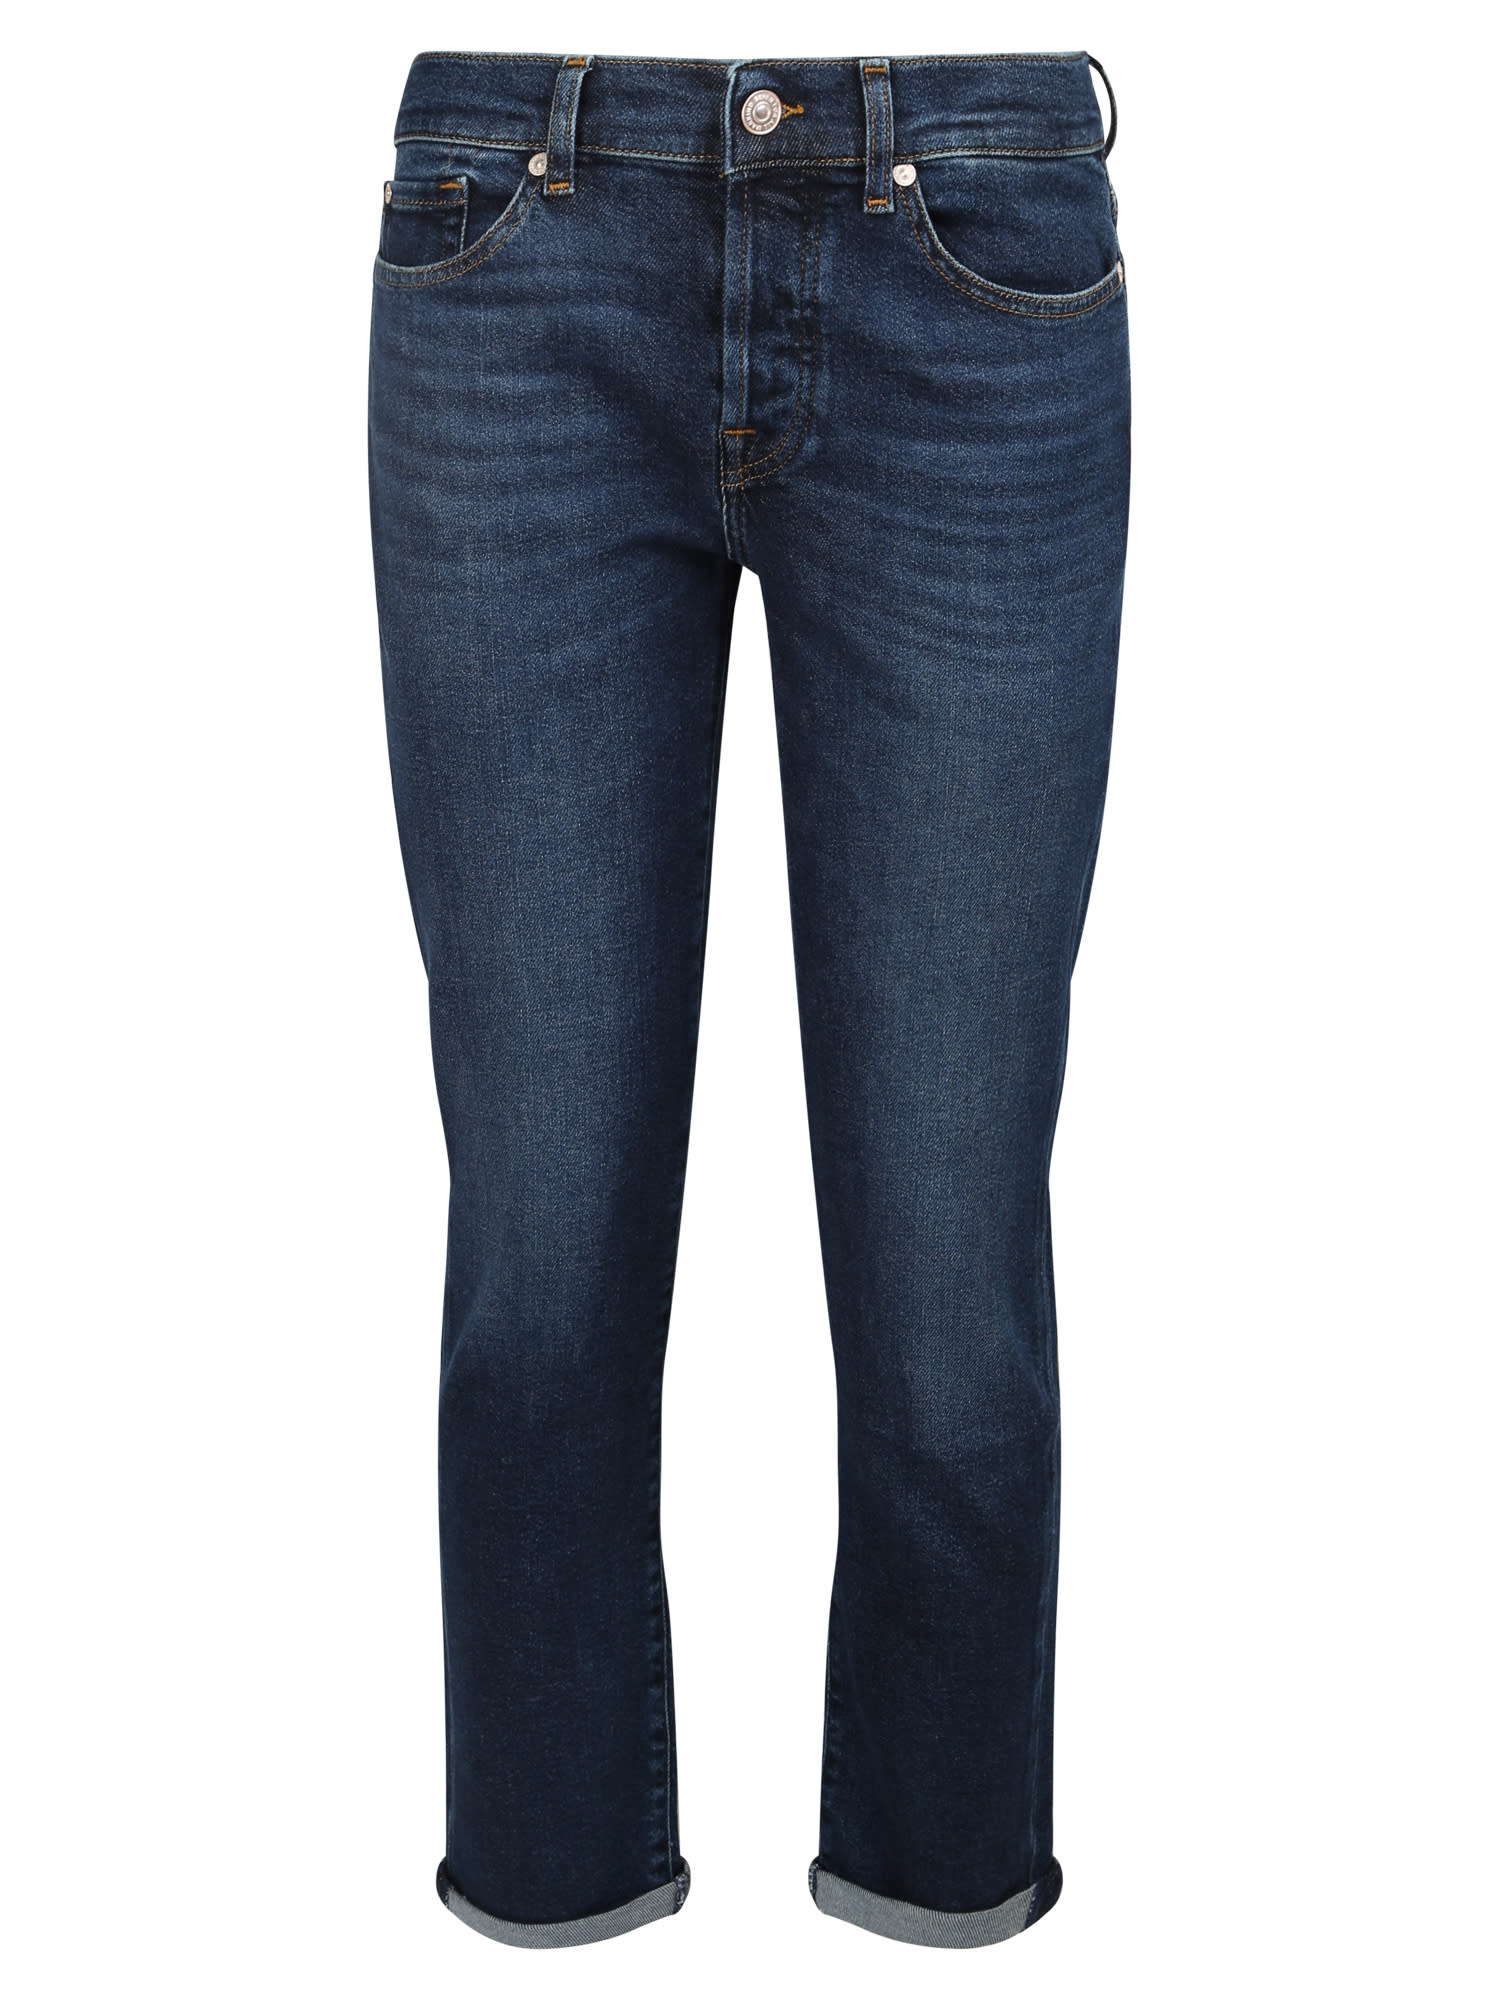 7 For All Mankind Asher Jeans